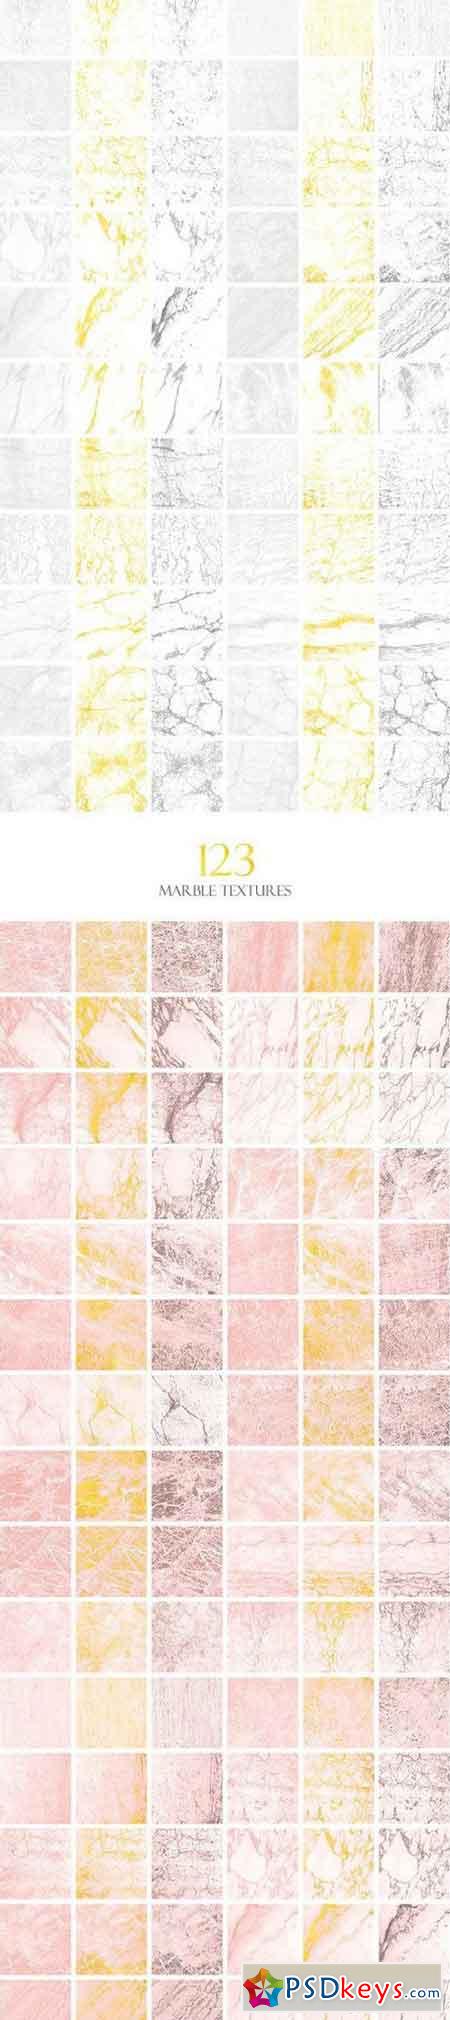 369 Marble Textures 1423000